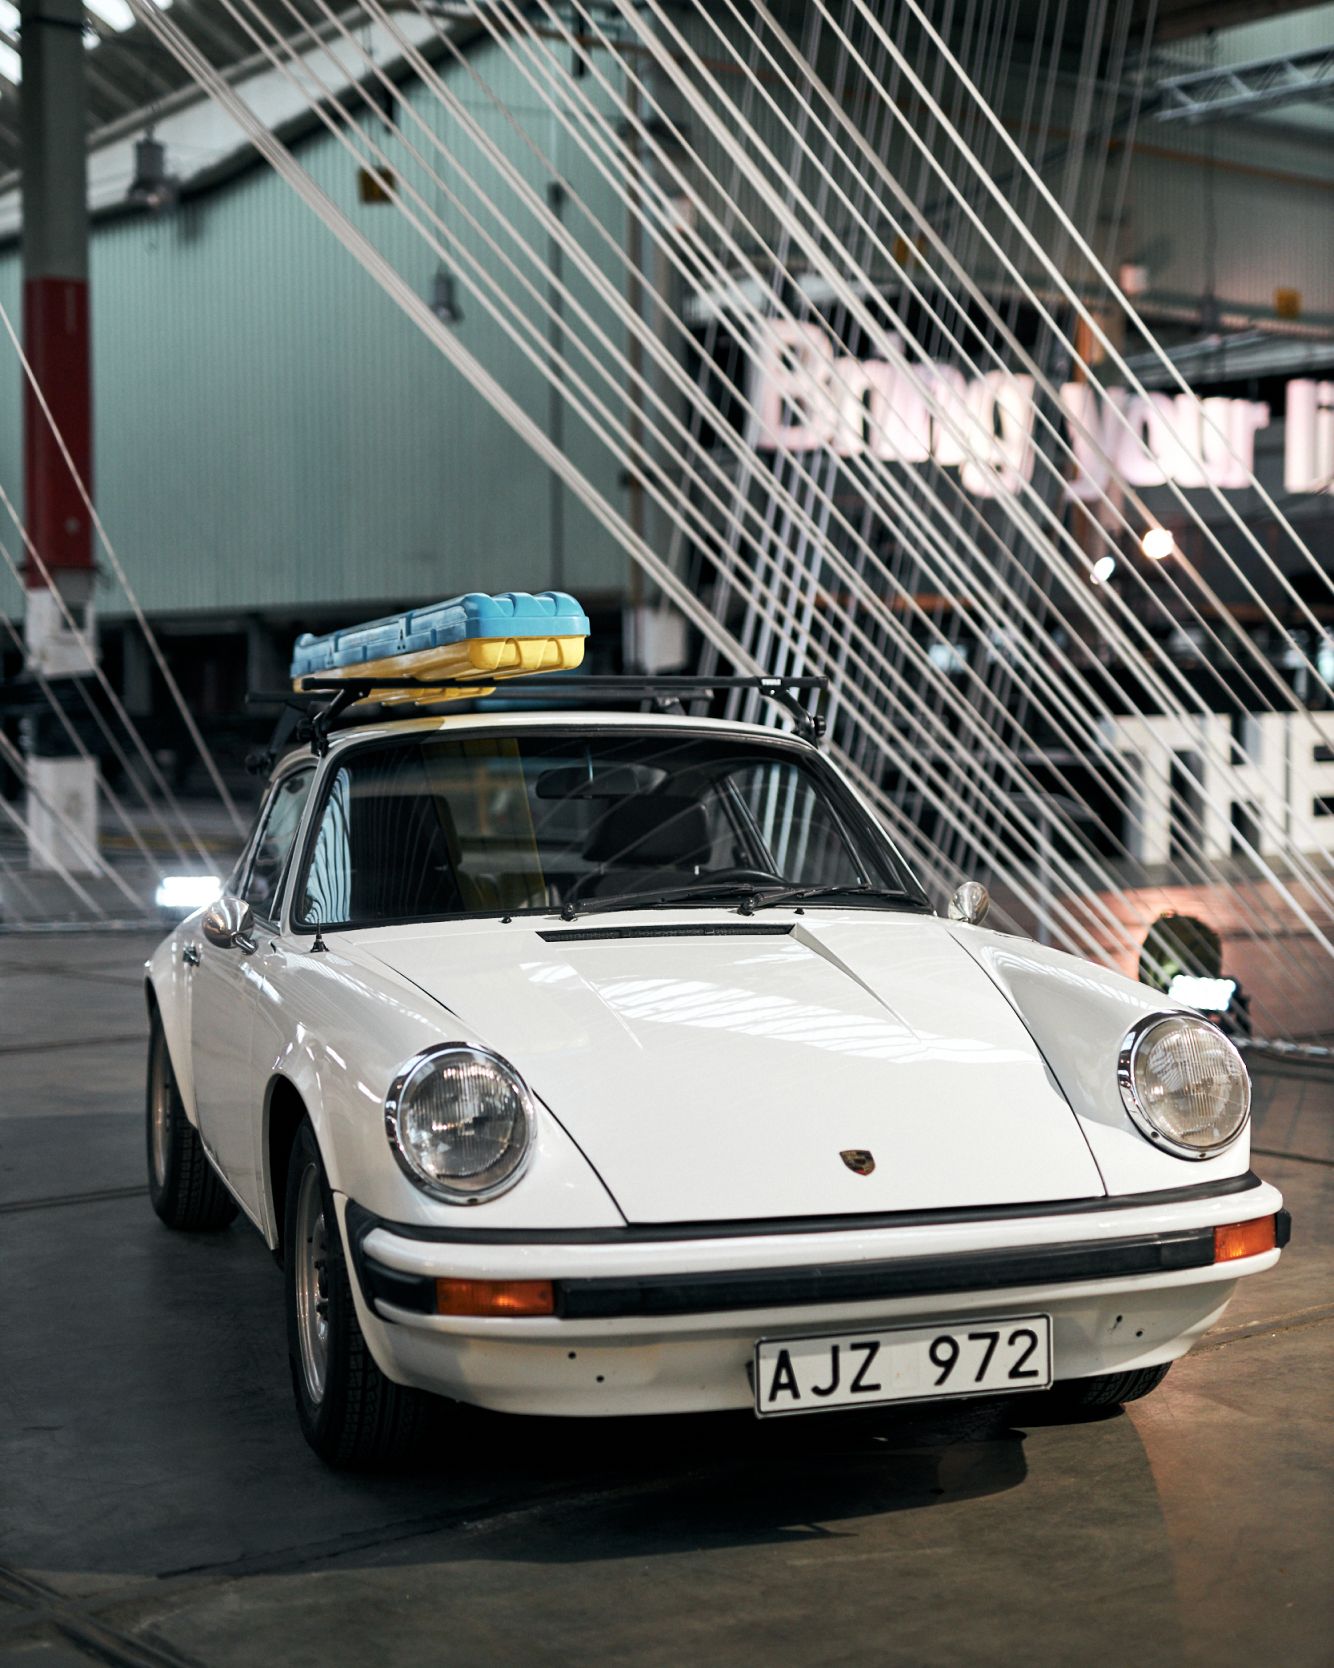 A white vintage Porsche 911 is parked in an exhibition hall with a vintage Thule roof box mounted